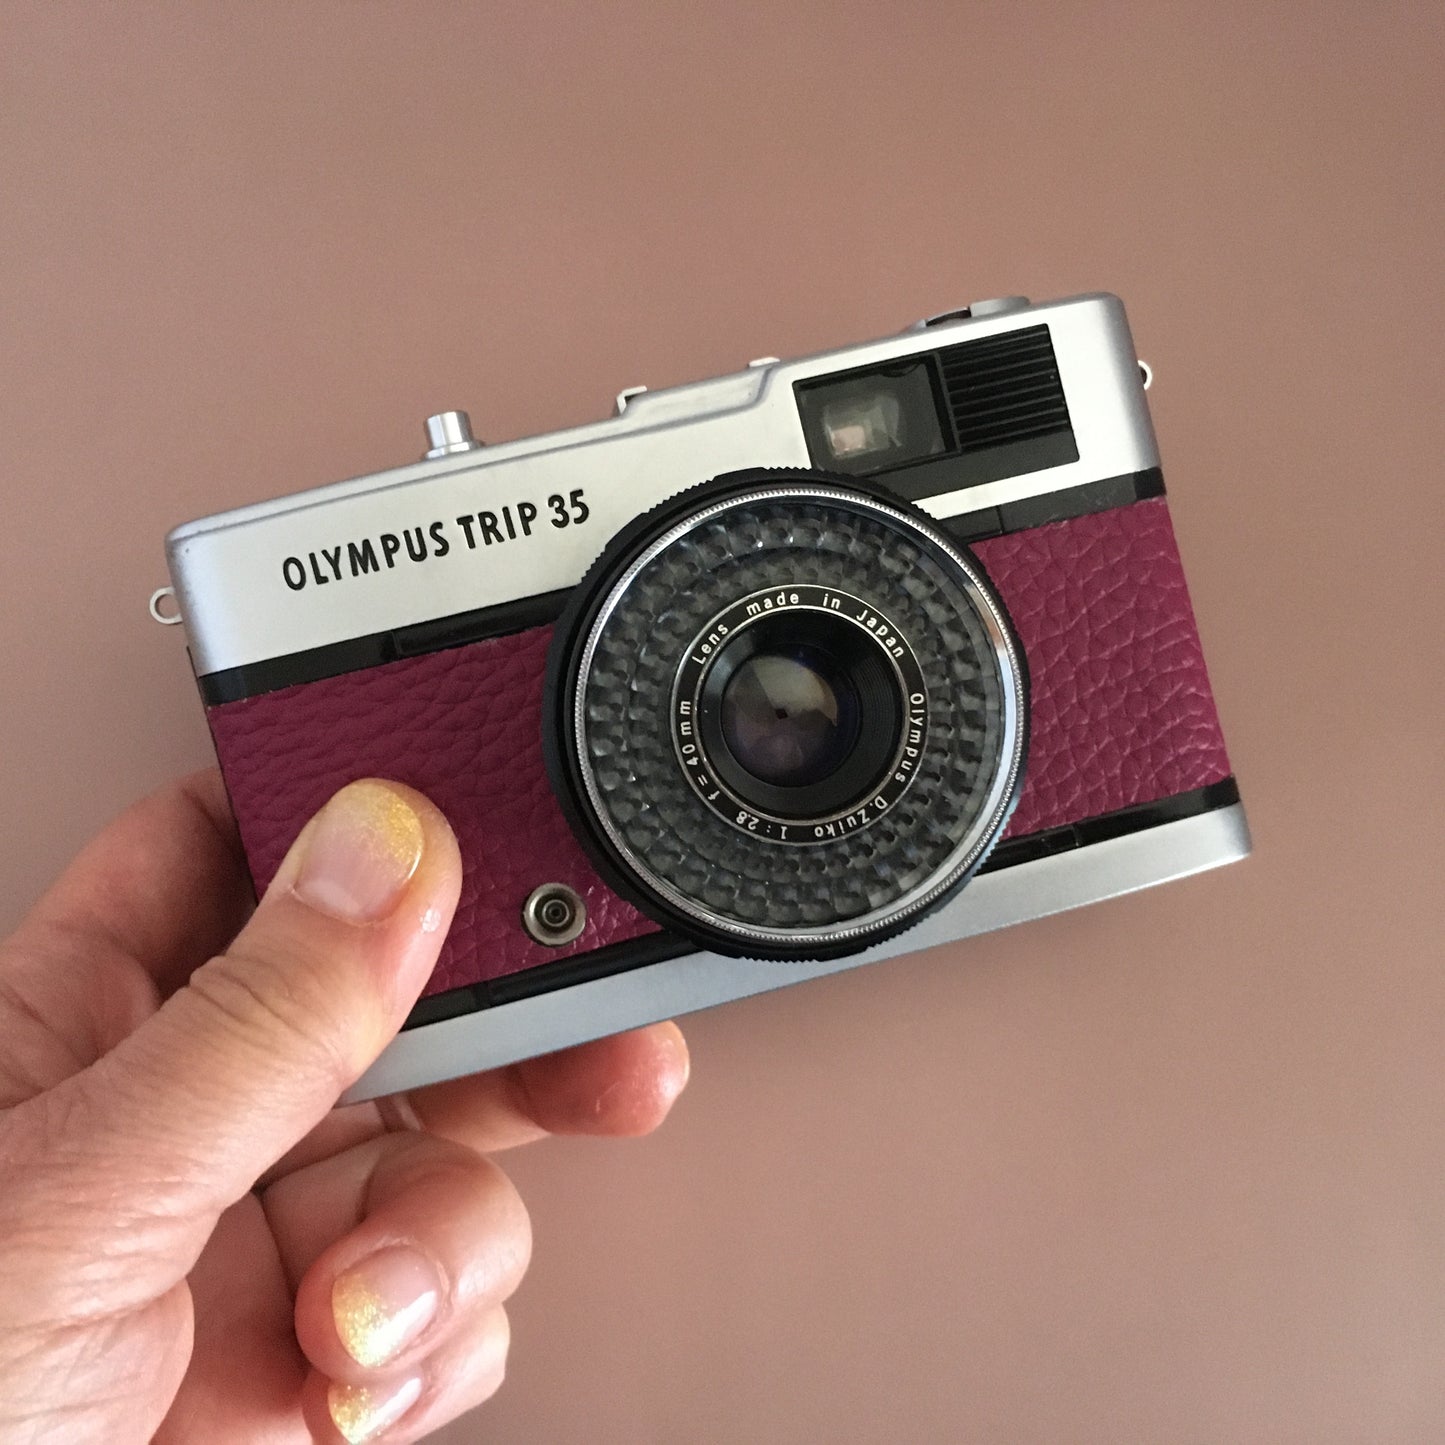 Olympus TRIP35 with raspberry leather